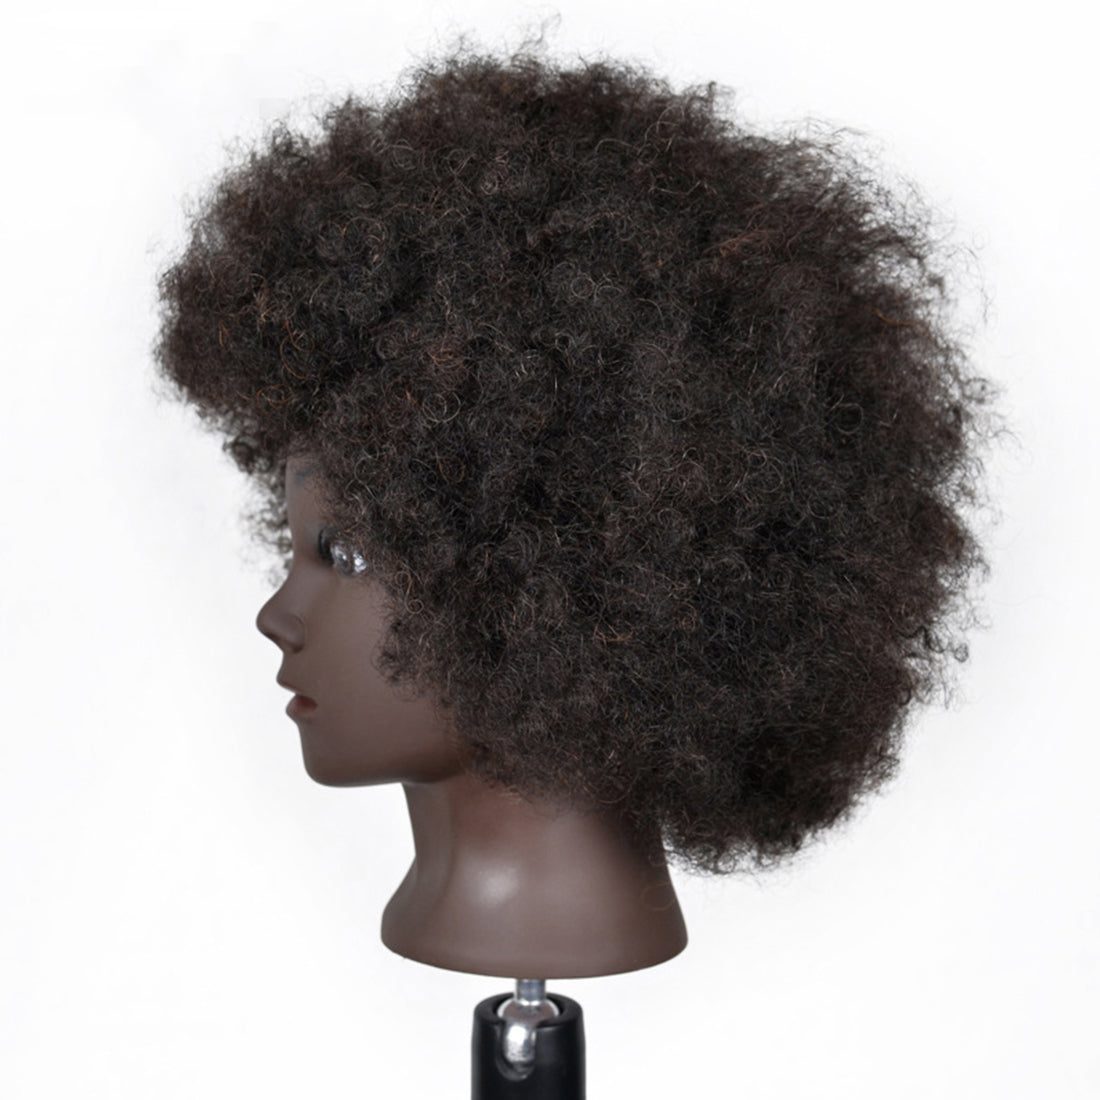 headdoll Afro Curly Mannequin Head with 100% Human Hair Curly Hair  Hairdresser Hair Styling Cosmetology Manikin Head Doll head for Hairdresser